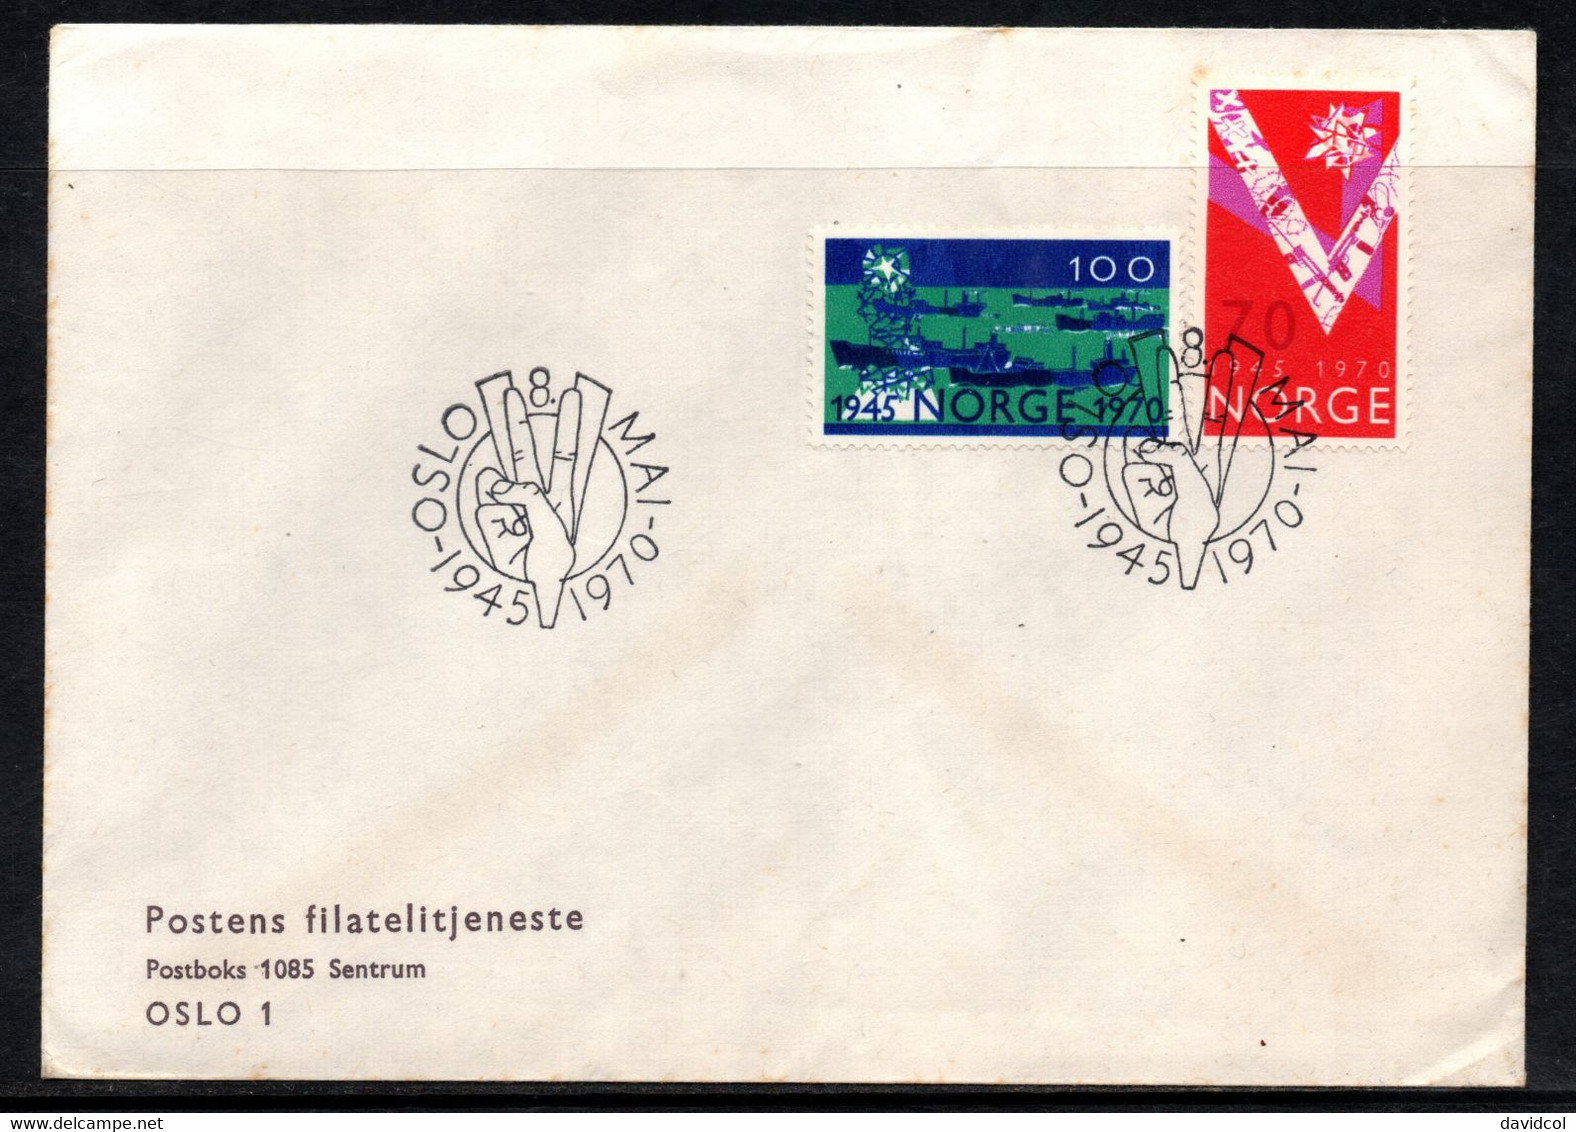 CA190- COVERAUCTION!!! - NORWAY 1970 - OSLO 8-5-70- NORWAY LIBERATION FROM THE GERMANS, 25TH ANNIVERSARY - Briefe U. Dokumente